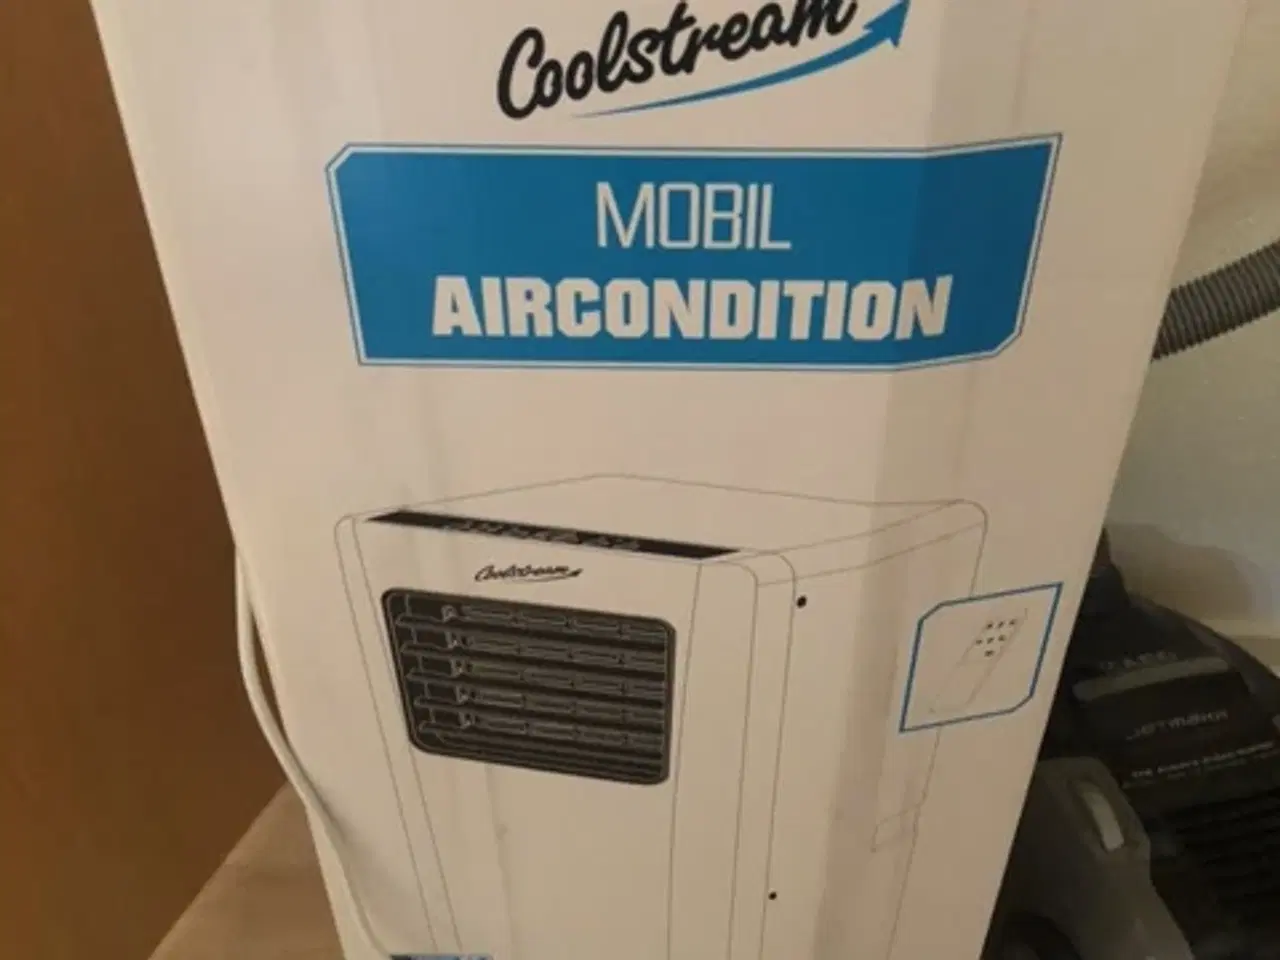 Billede 1 - Mobil Airc0ndition